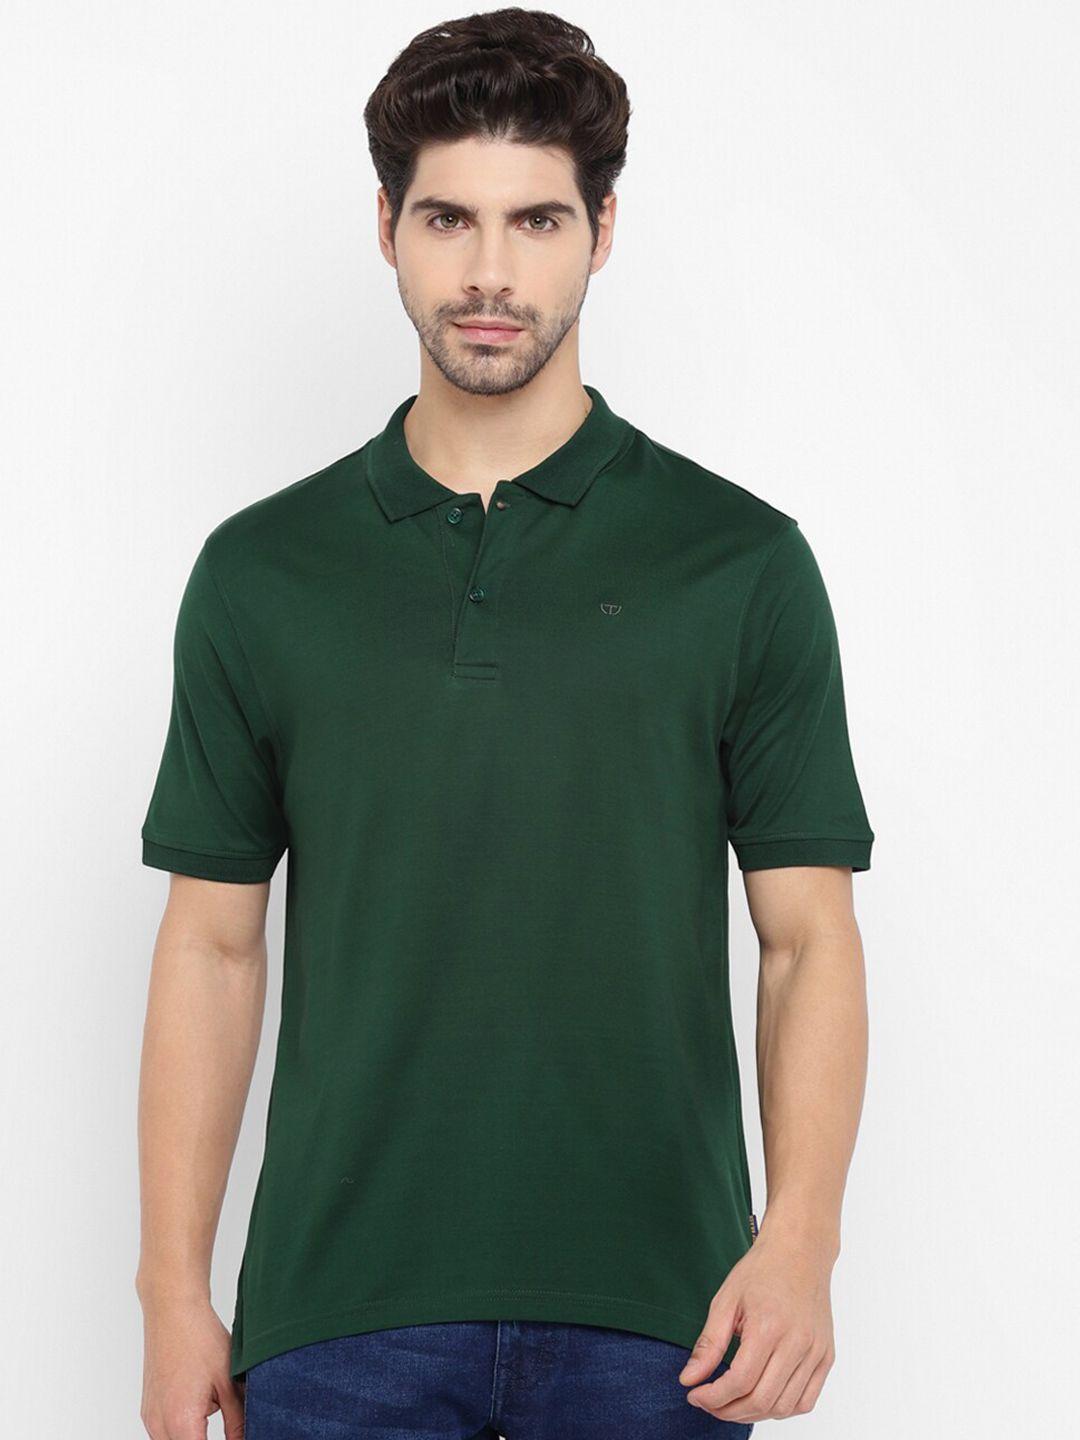 top brass polo collar cotton knitted t-shirt